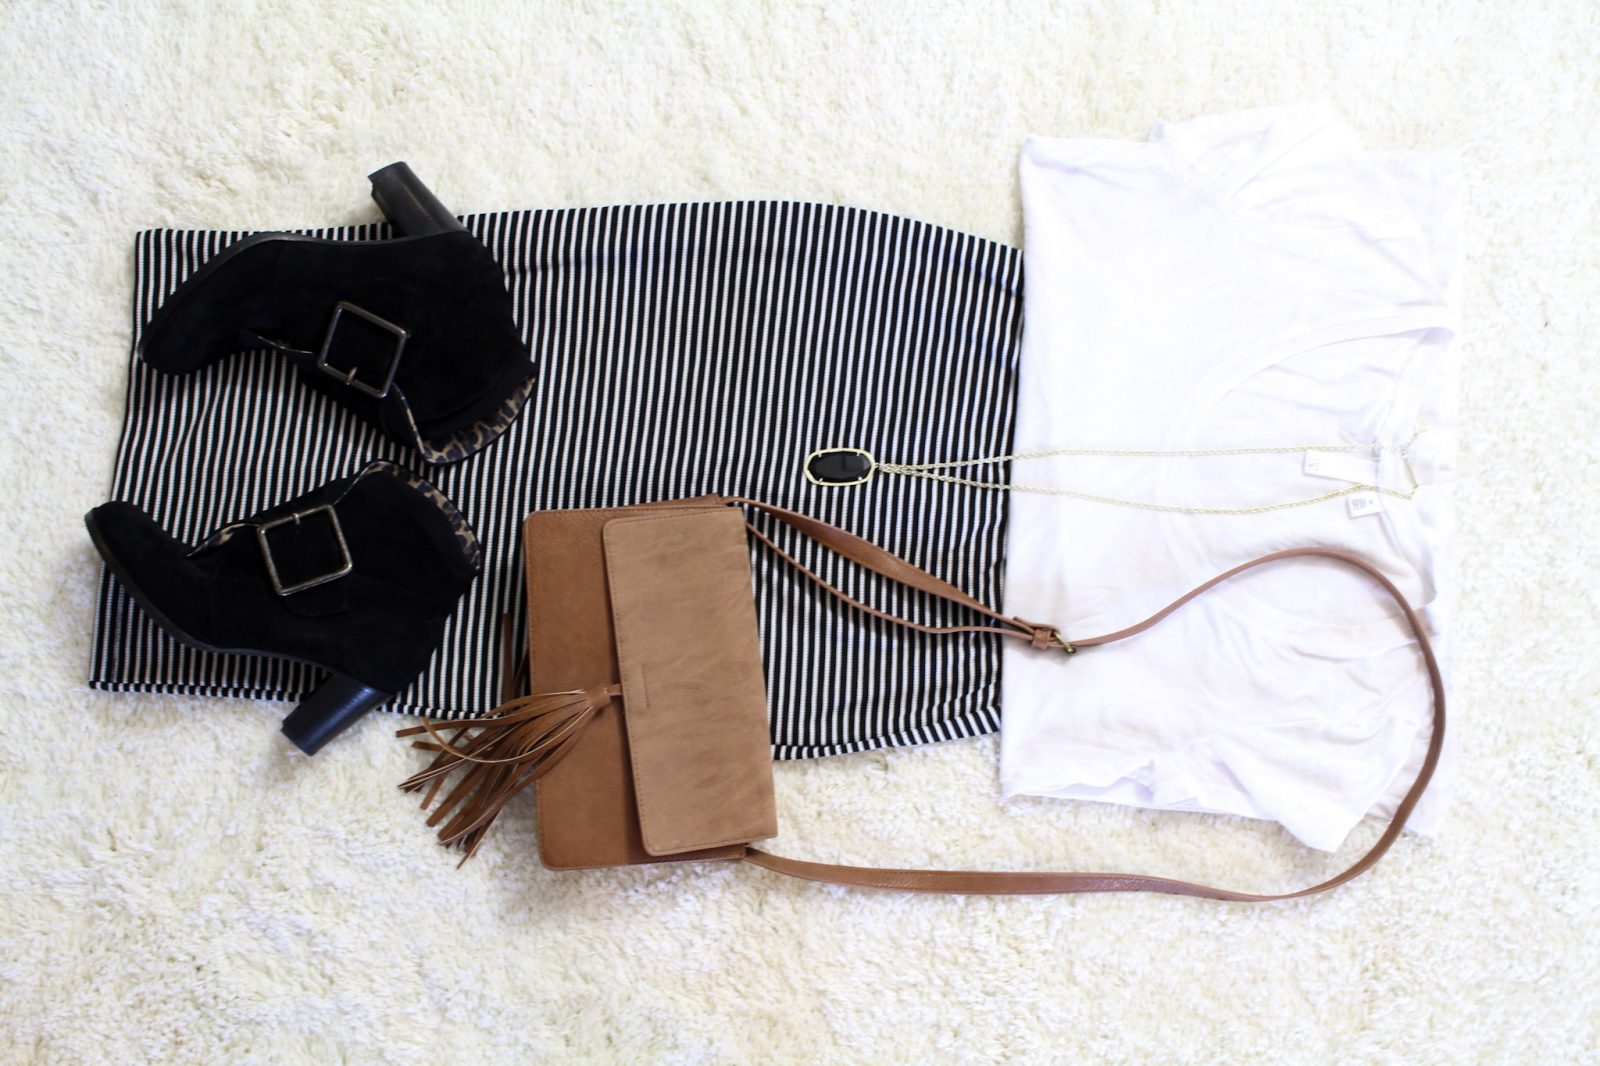 Capsule Wardrobe for Traveling / Featuring Sloane Ranger - According to ...